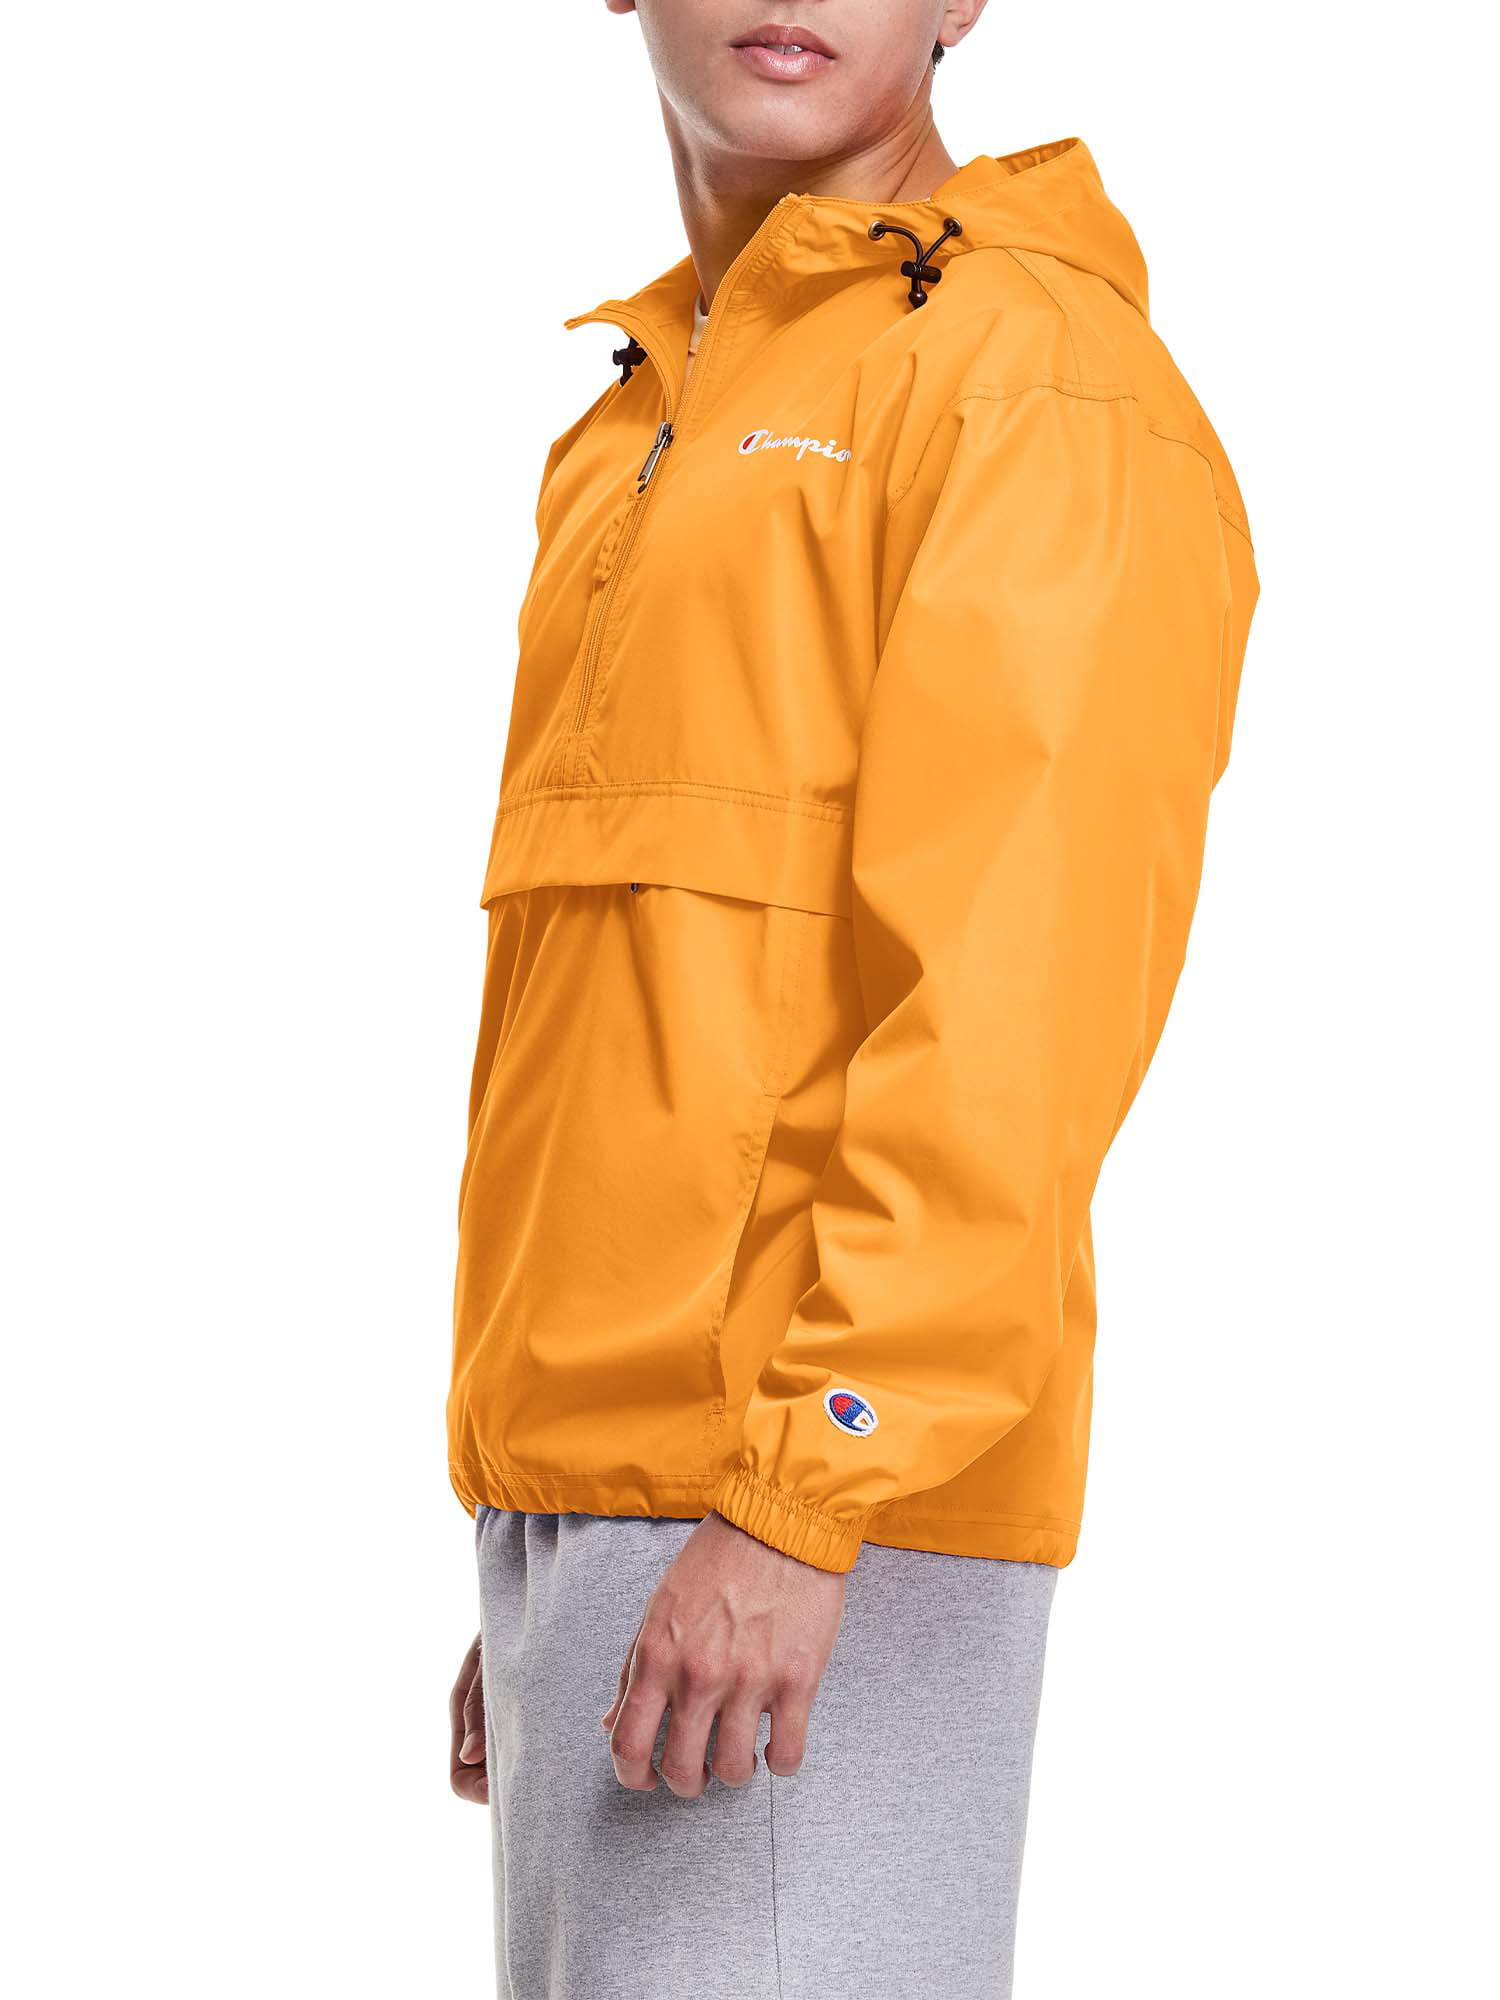 Buy Champion Men's Stadium Packable Windbreaker Jacket, Sizes S-2XL,  Champion Mens Jackets Online at Lowest Price in Indonesia. 417438926